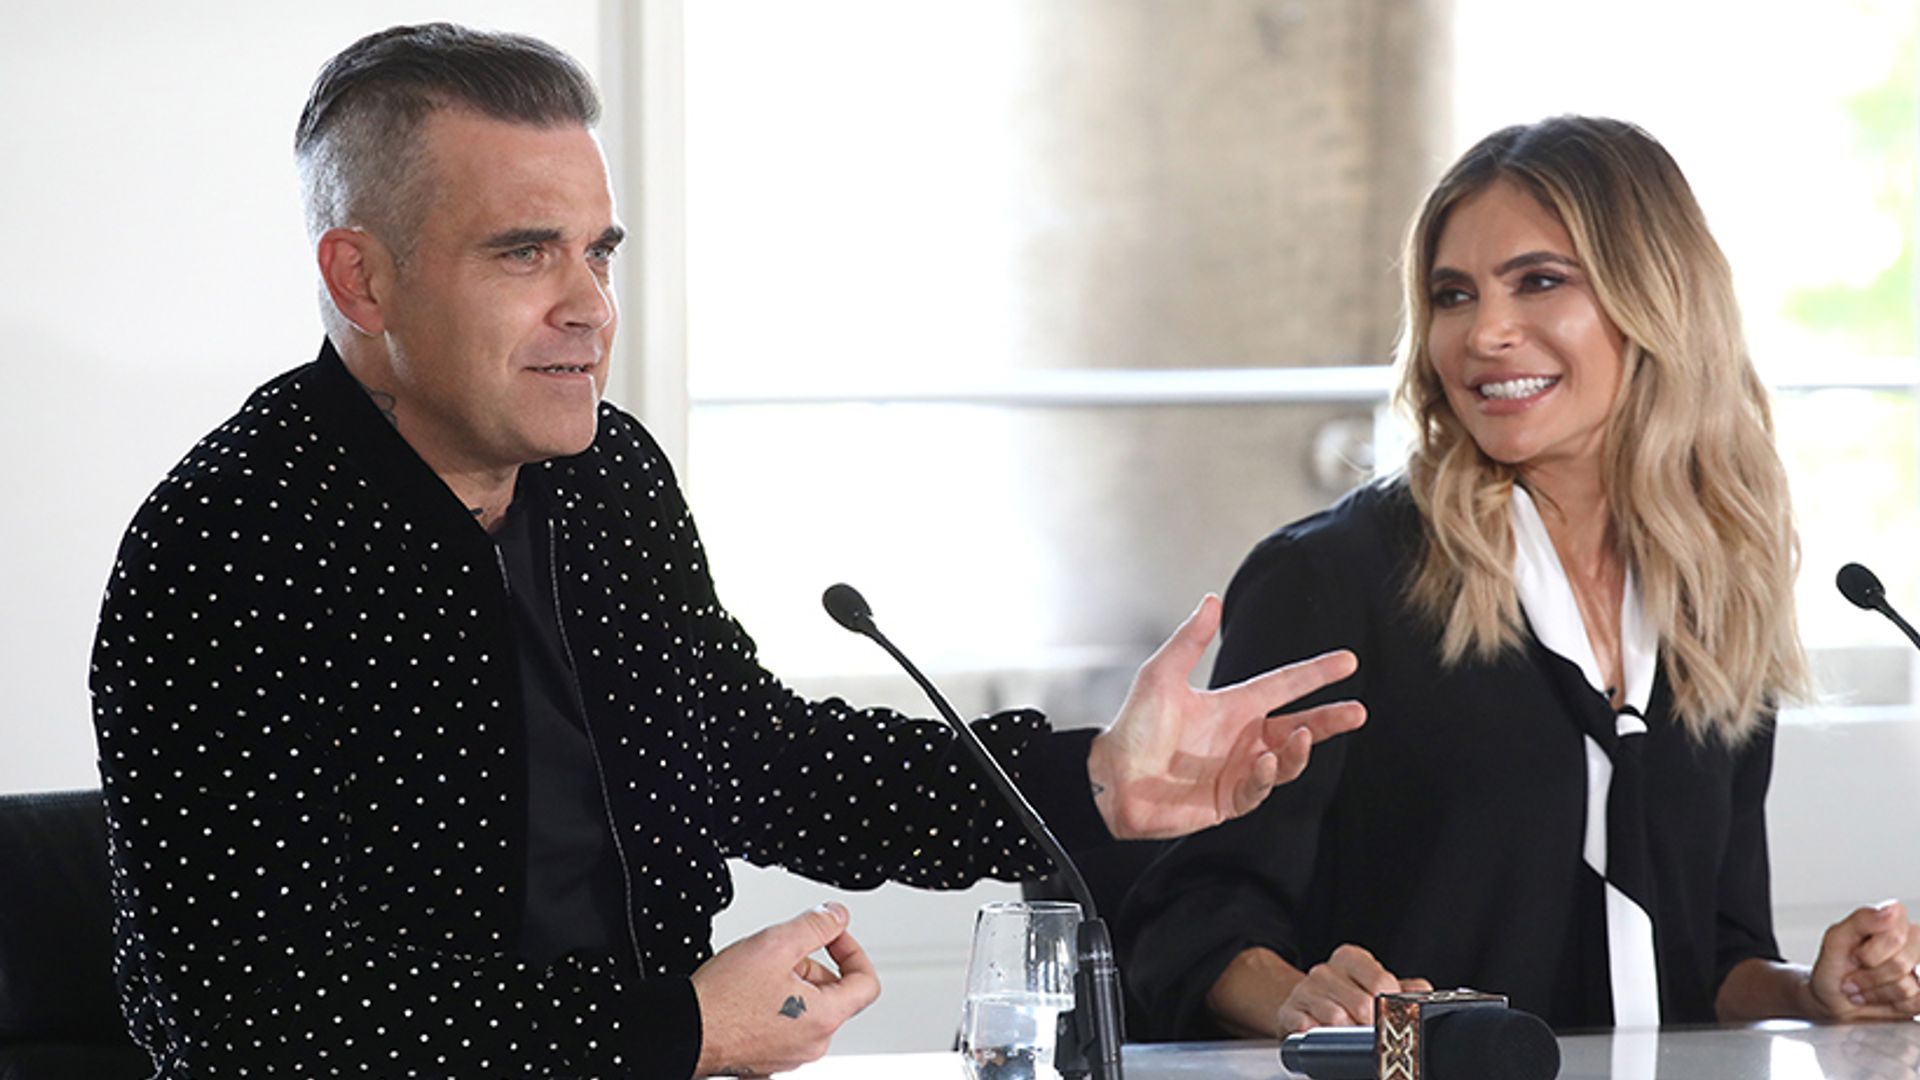 New dad-of-three Robbie Williams confirms he is taking X Factor hiatus